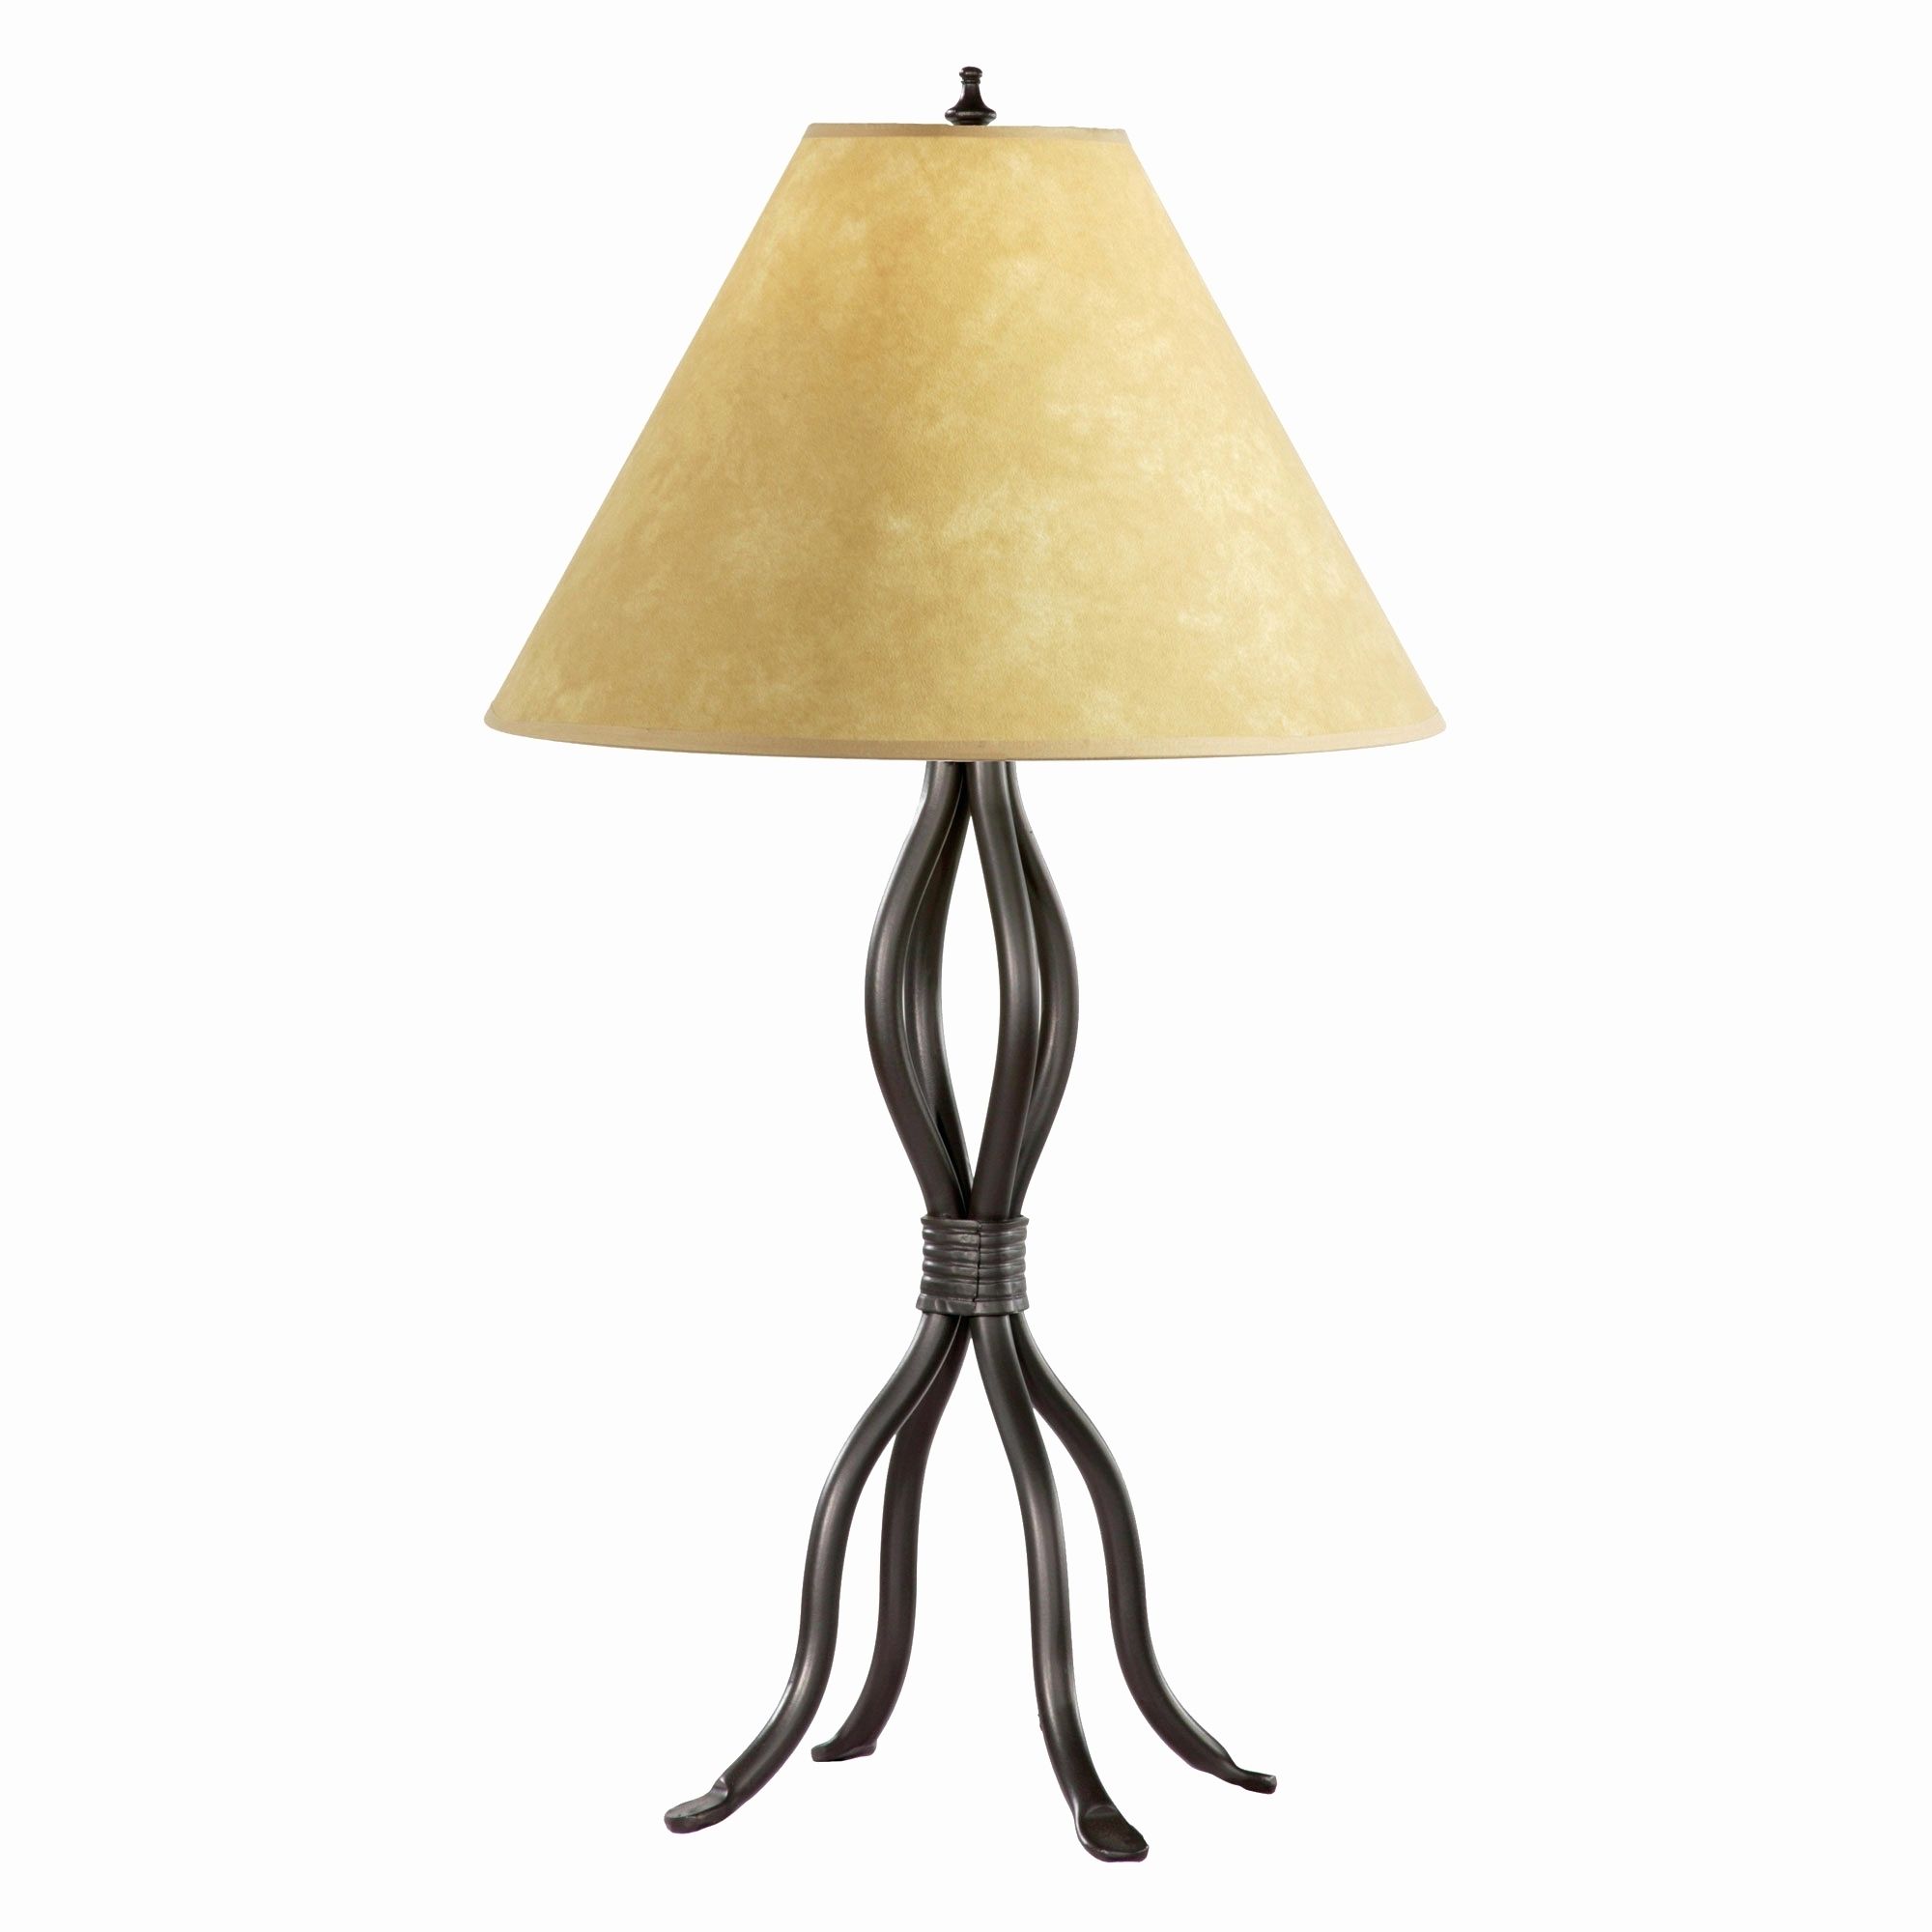 Wrought Iron Living Room Table Lamps With Regard To Most Recently Released Wrought Iron Floor Lamps New Table Antique Lamp – Downthewicket (View 6 of 15)